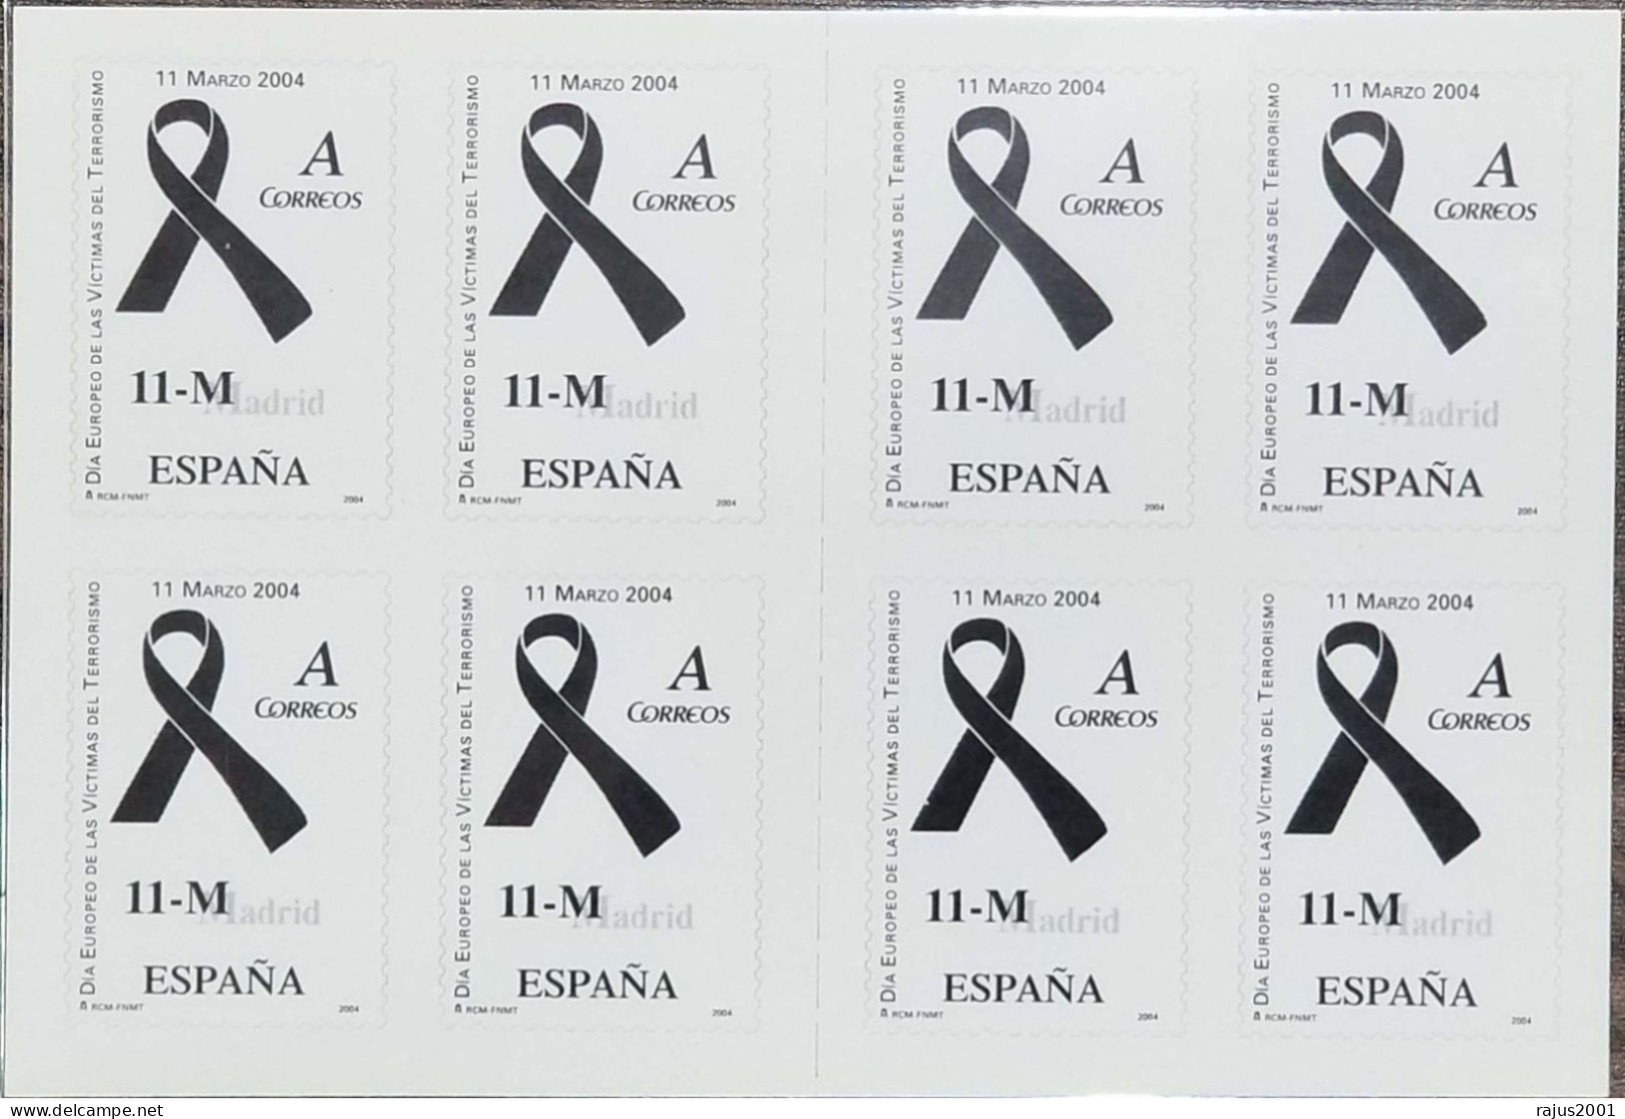 European Day In Memory Of The Victims Of Terrorism, Terrorist Attack, Block Of 8 Self Adhesive Booklet MNH 11 March 2004 - Blocs & Feuillets